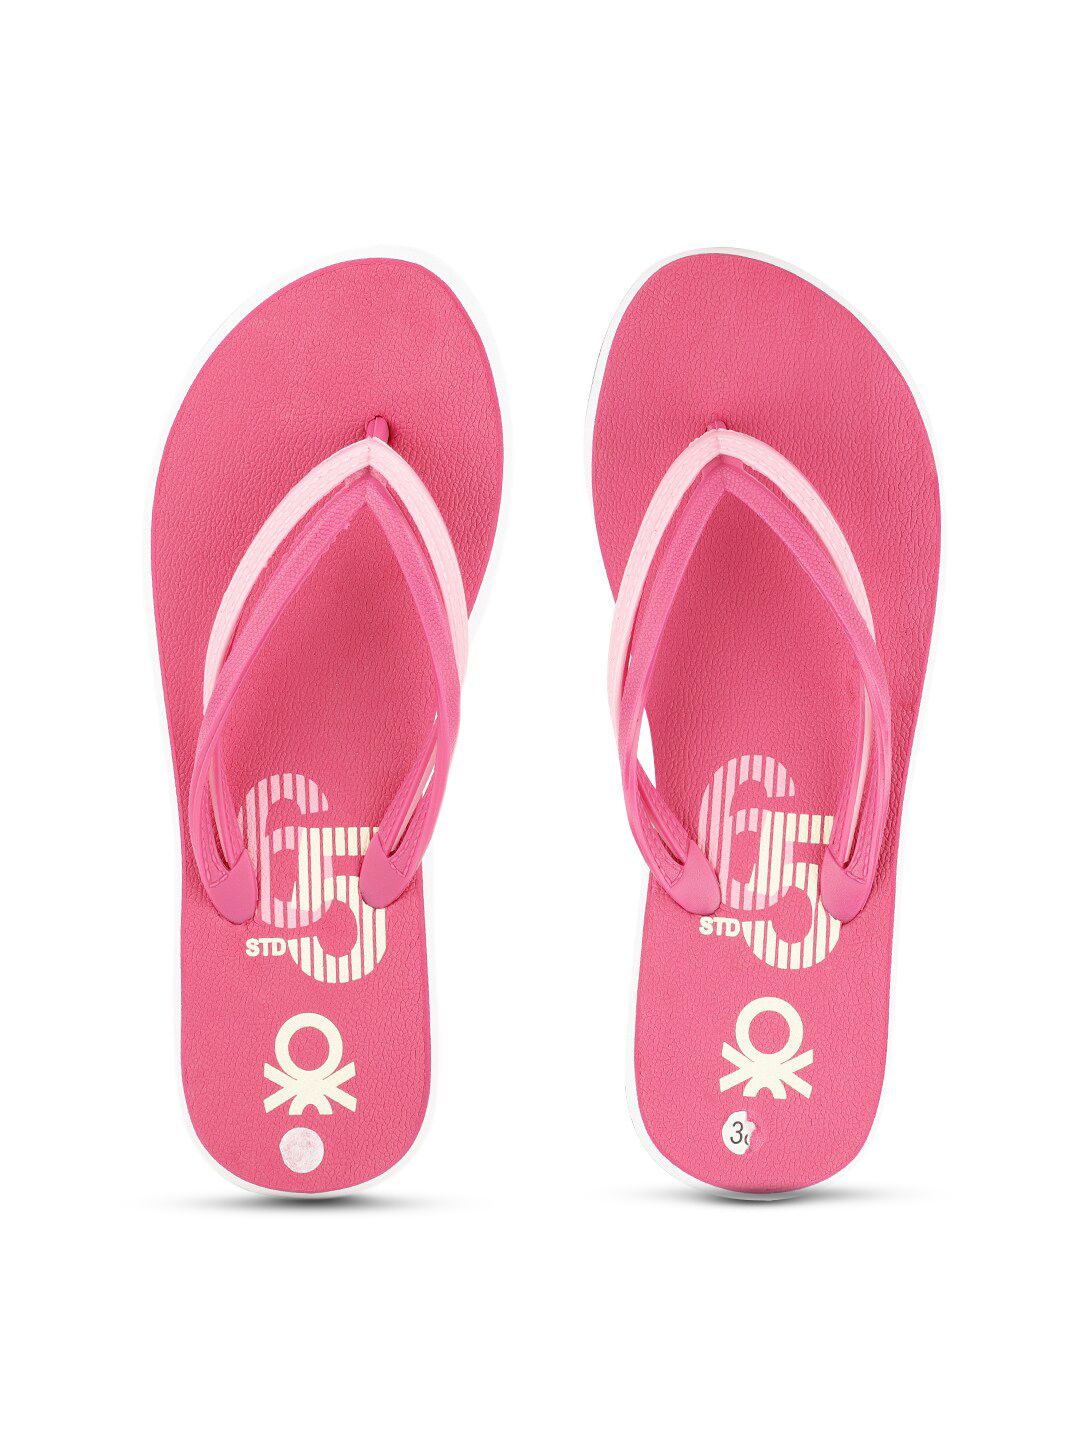 United Colors of Benetton Women Fuchsia & White Printed Thong Flip-Flops Price in India